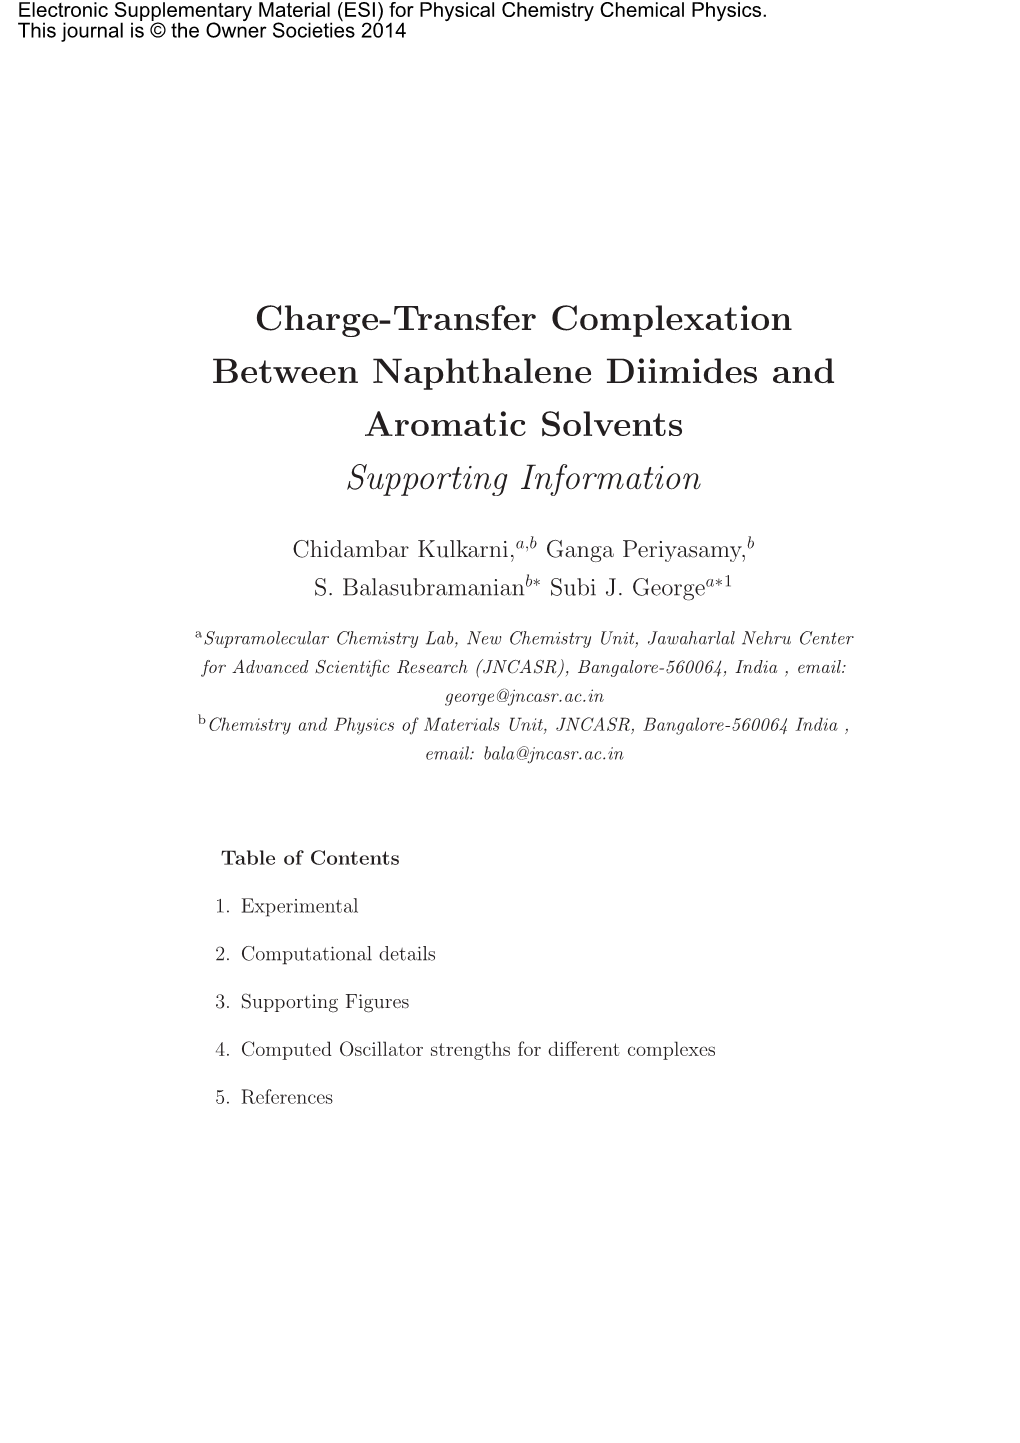 Charge-Transfer Complexation Between Naphthalene Diimides and Aromatic Solvents Supporting Information